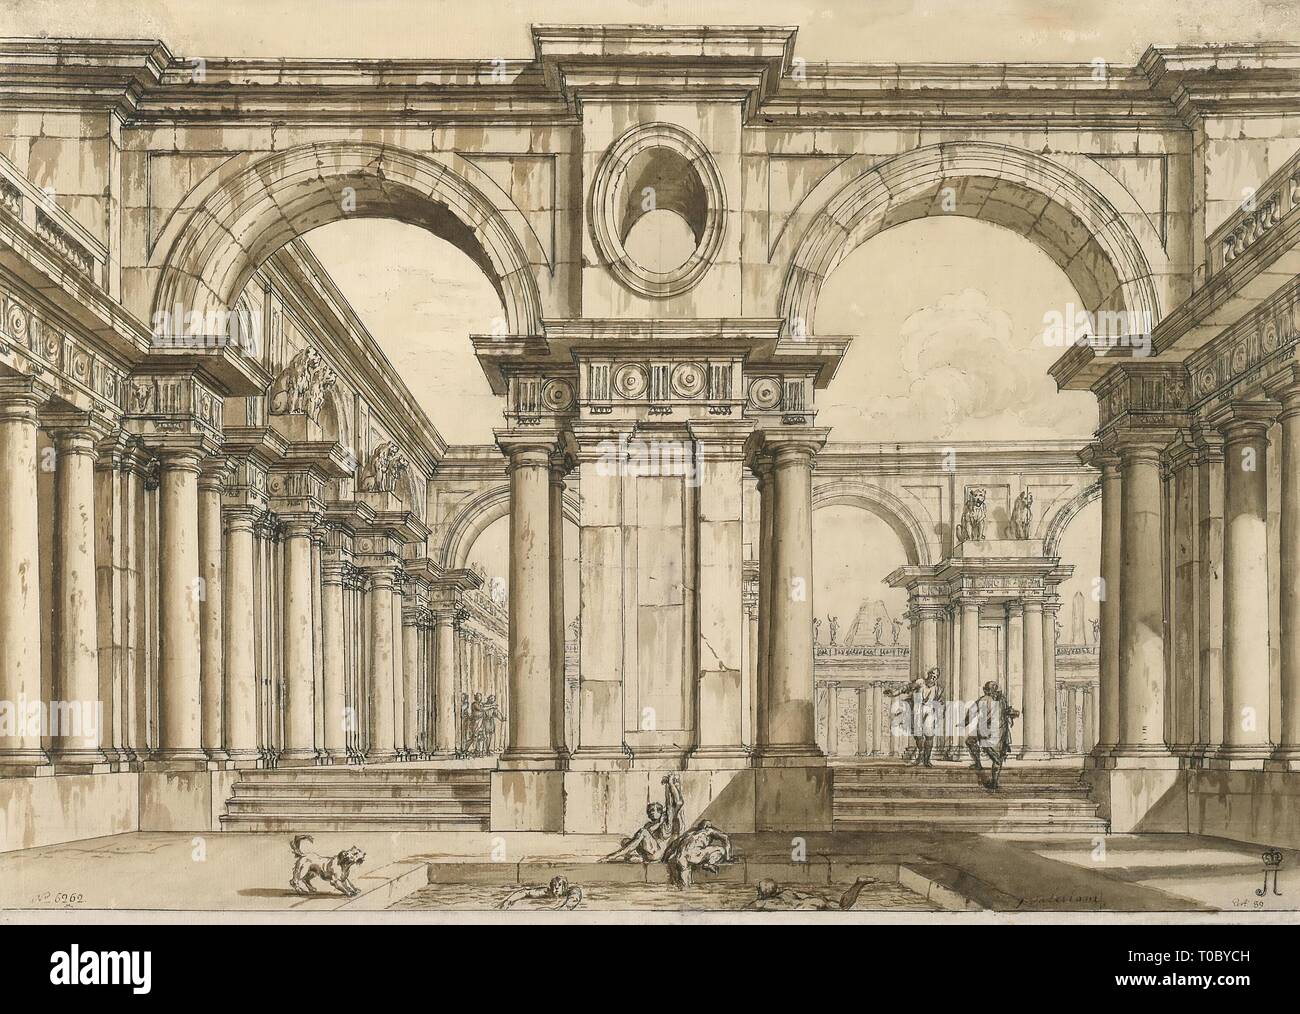 'Sketch of the Scenery for the Opera 'The Mercy of Titus''. Russia, 18th century. Dimensions: 35,8x50,7 cm. Museum: State Hermitage, St. Petersburg. Author: GIUSEPPE VALERIANI. Stock Photo